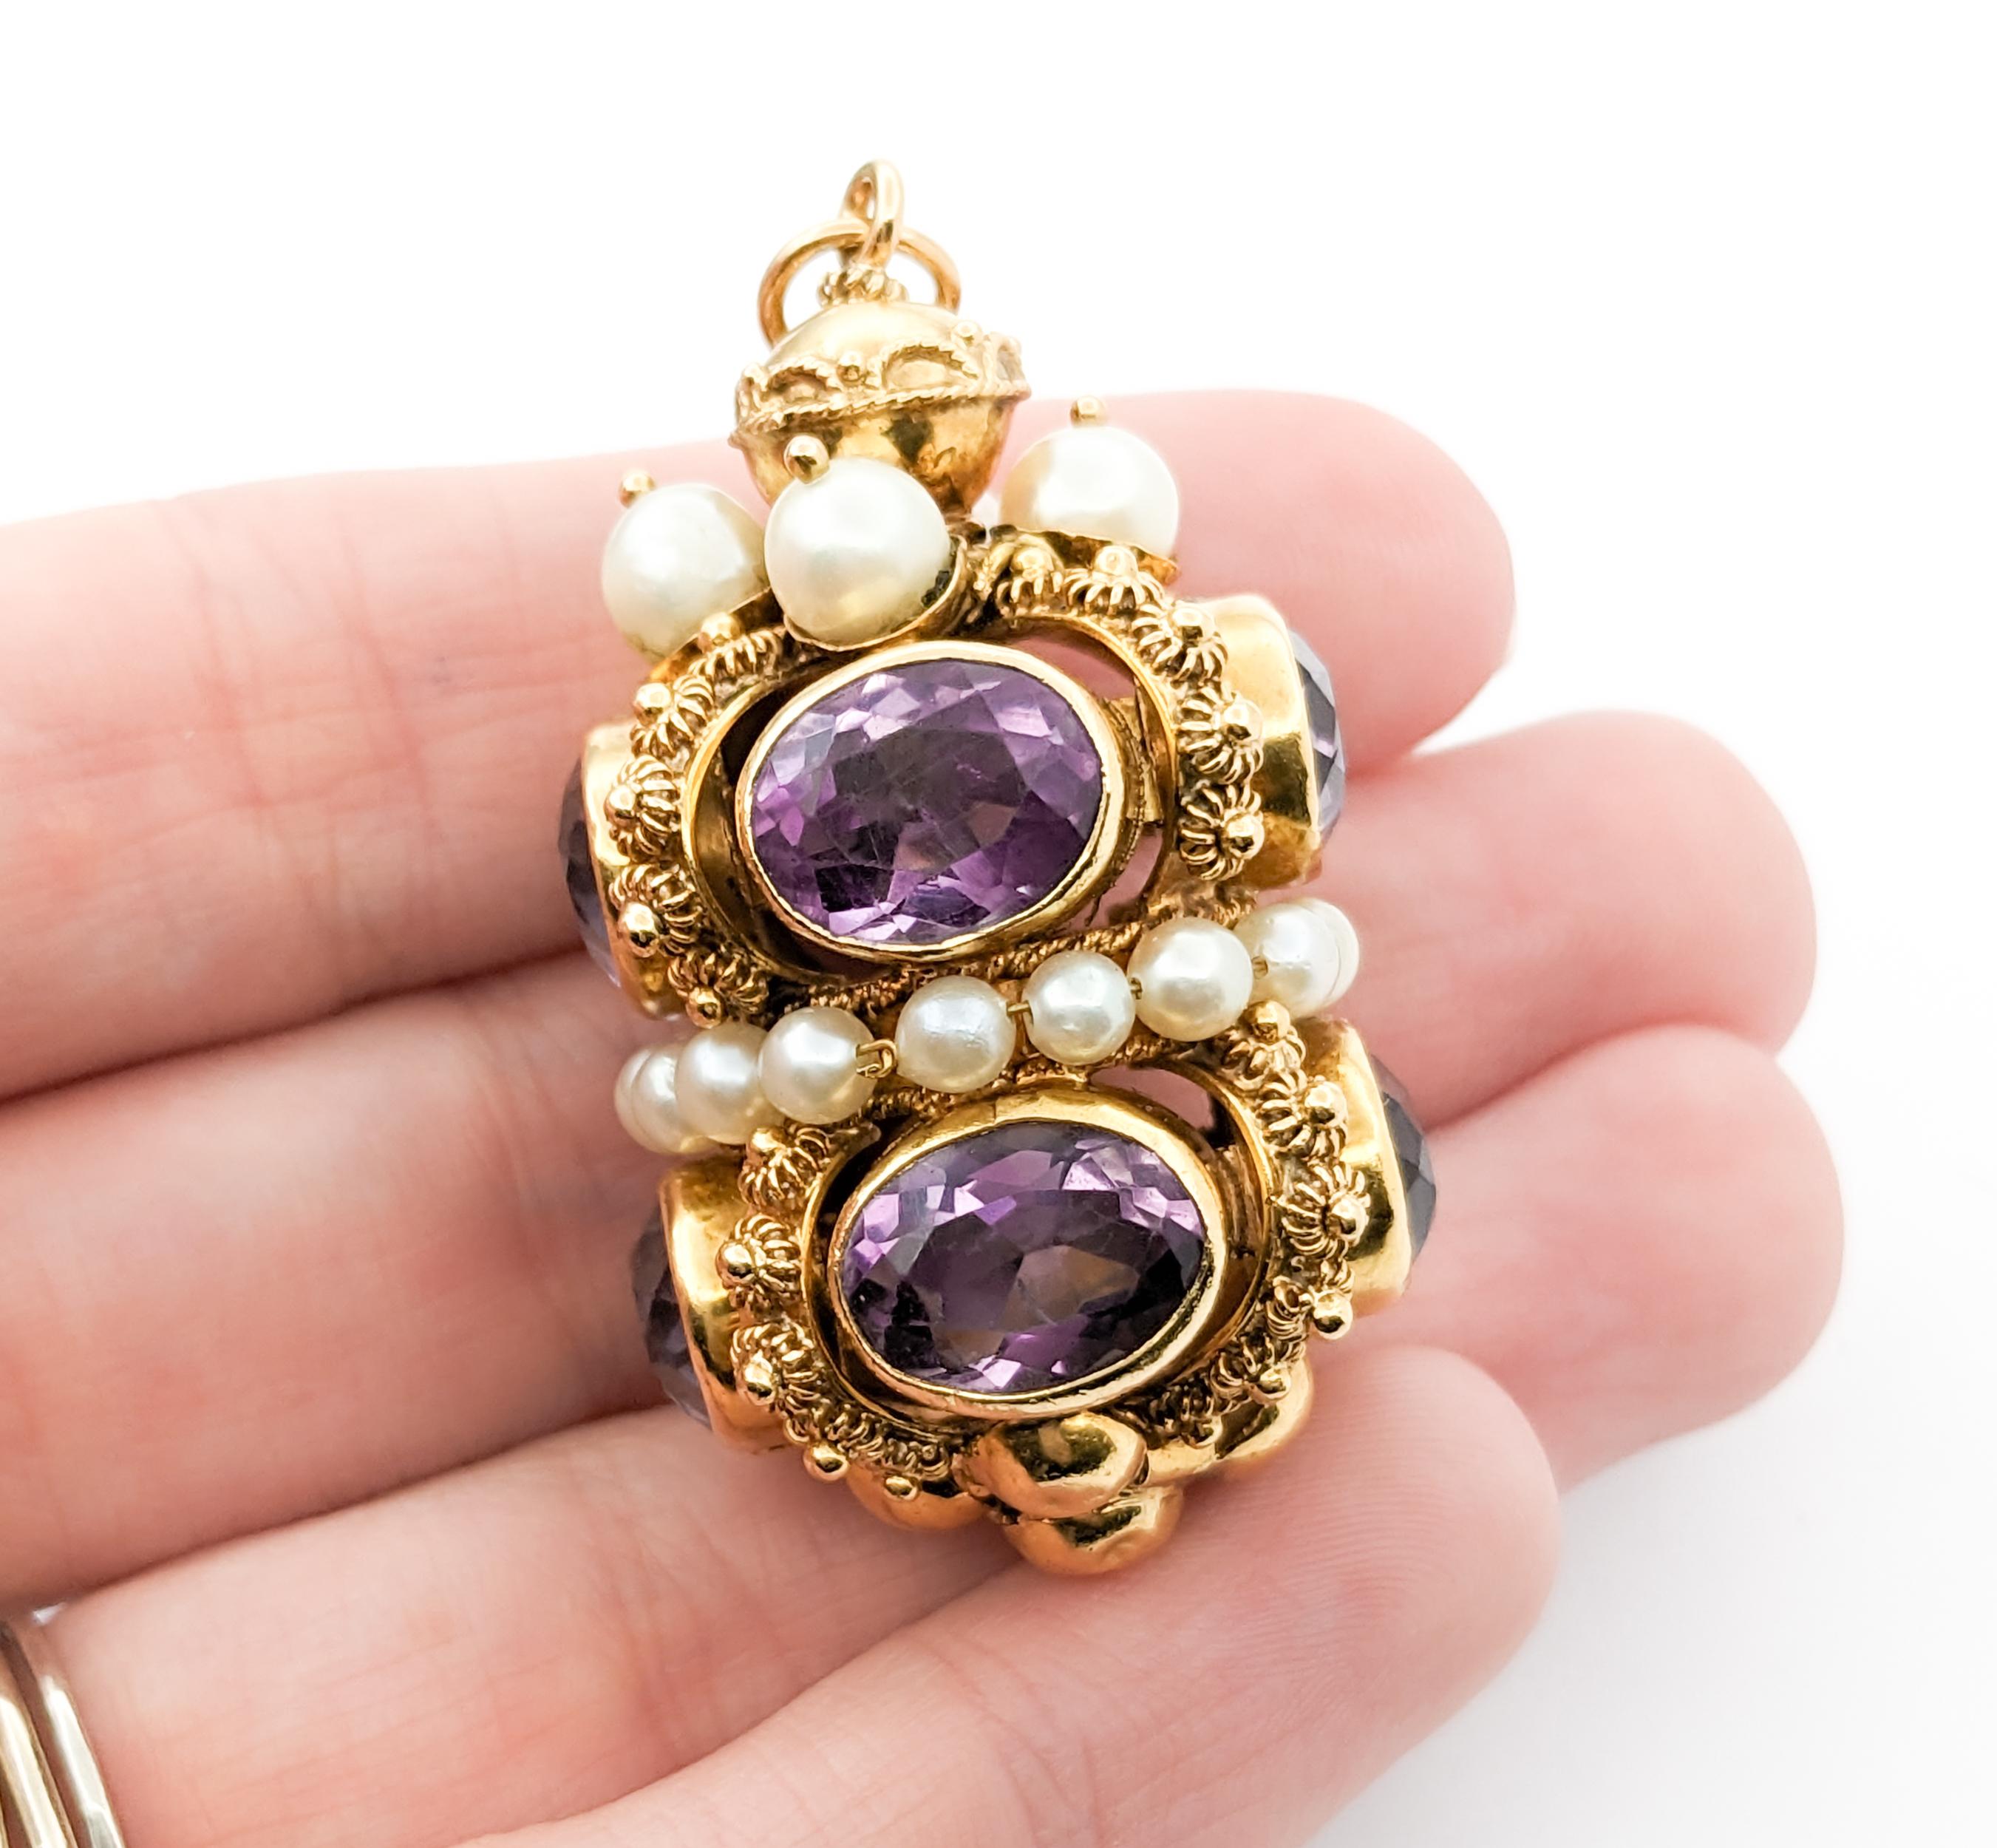 Oval Cut Etruscan Revival 18K Gold, Amethyst & Pearl Fob Pendant For Sale